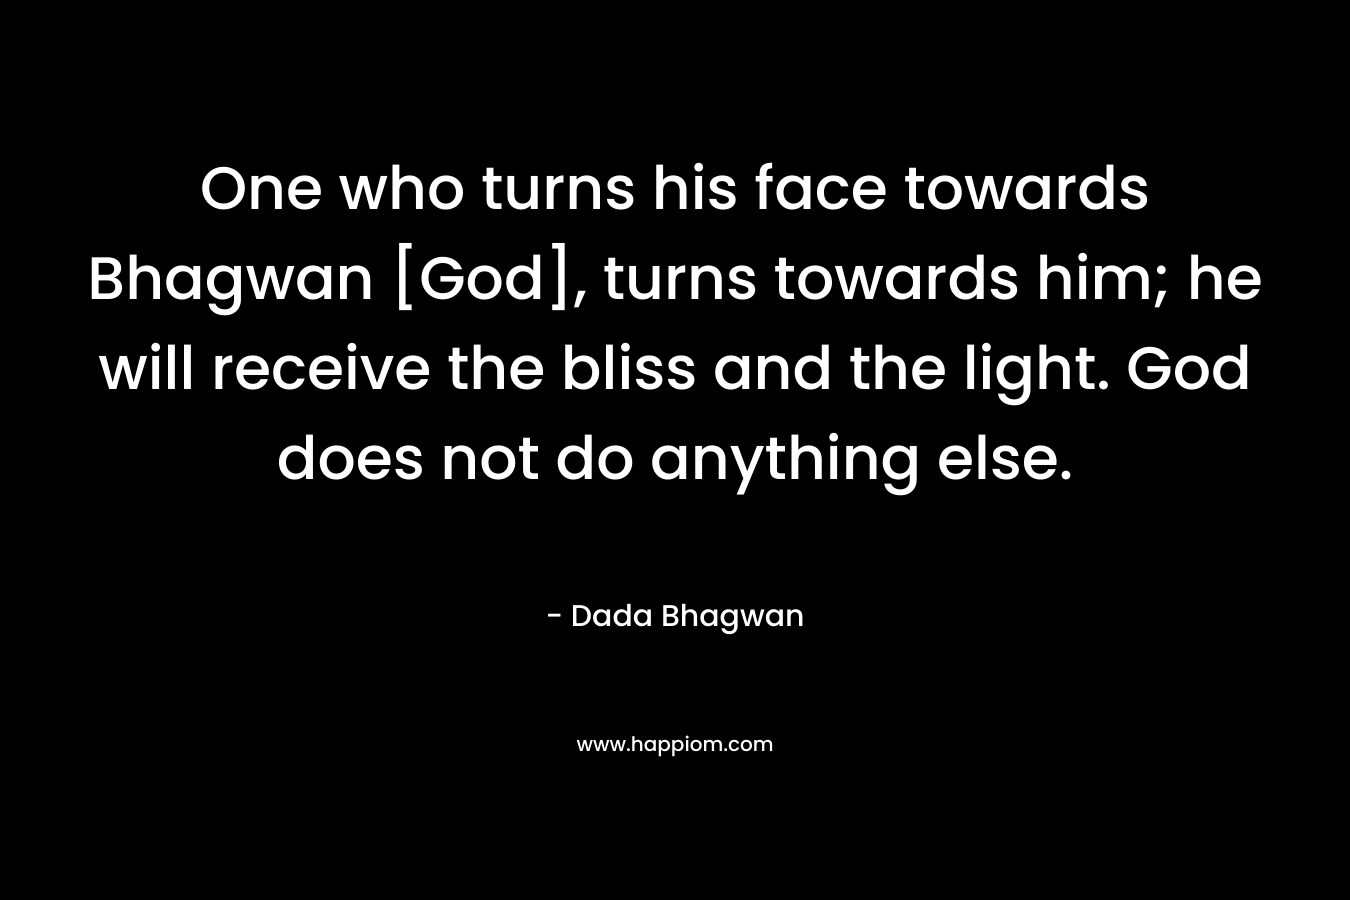 One who turns his face towards Bhagwan [God], turns towards him; he will receive the bliss and the light. God does not do anything else.